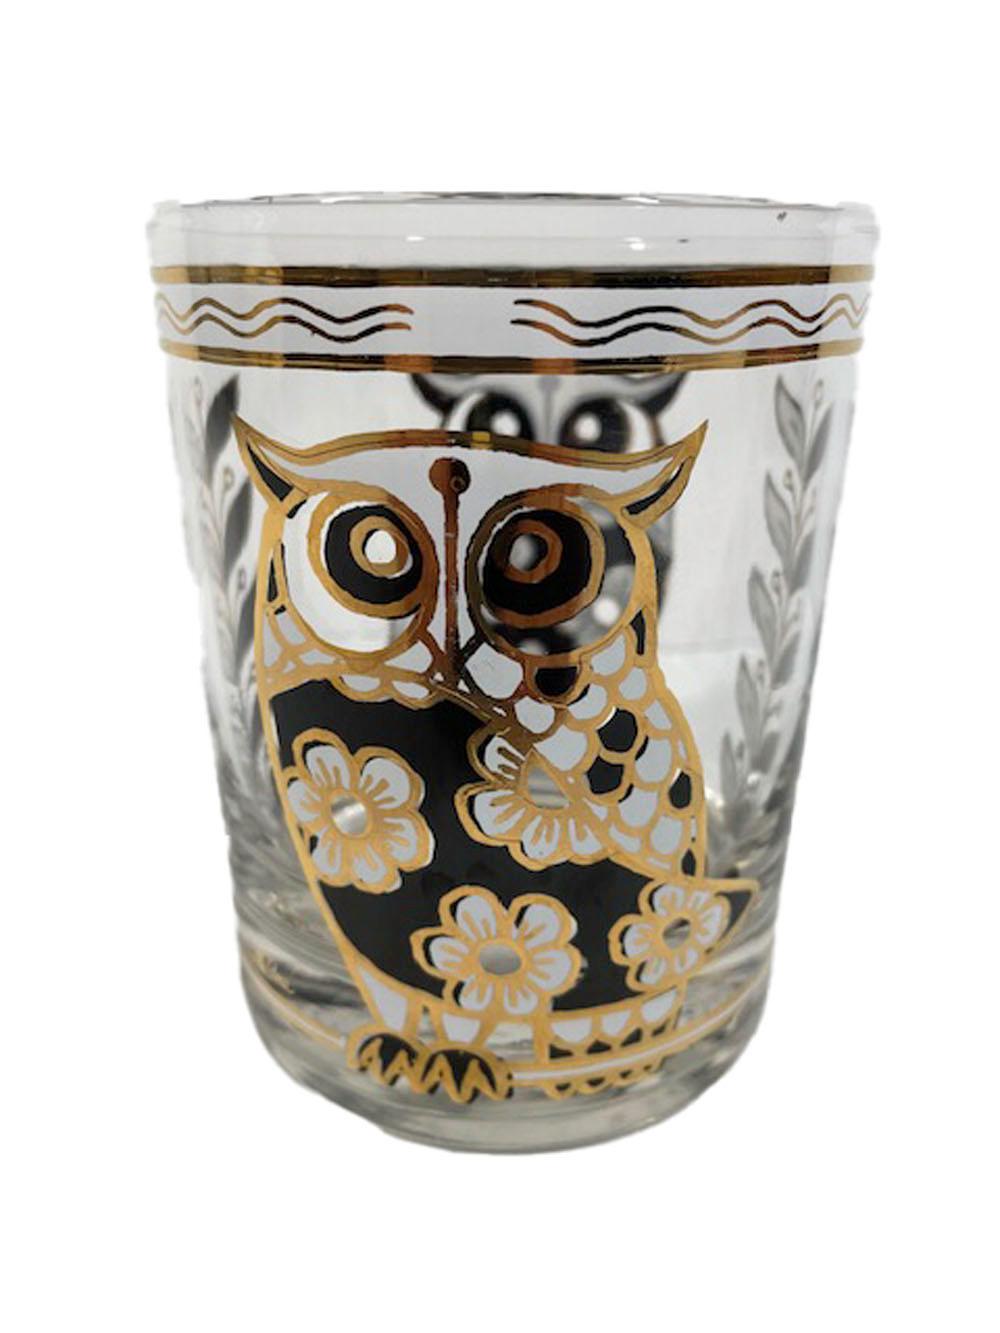 Six Cera Glass Rocks Glasses with Flower Patterned Owls in Black, White and Gold For Sale 2